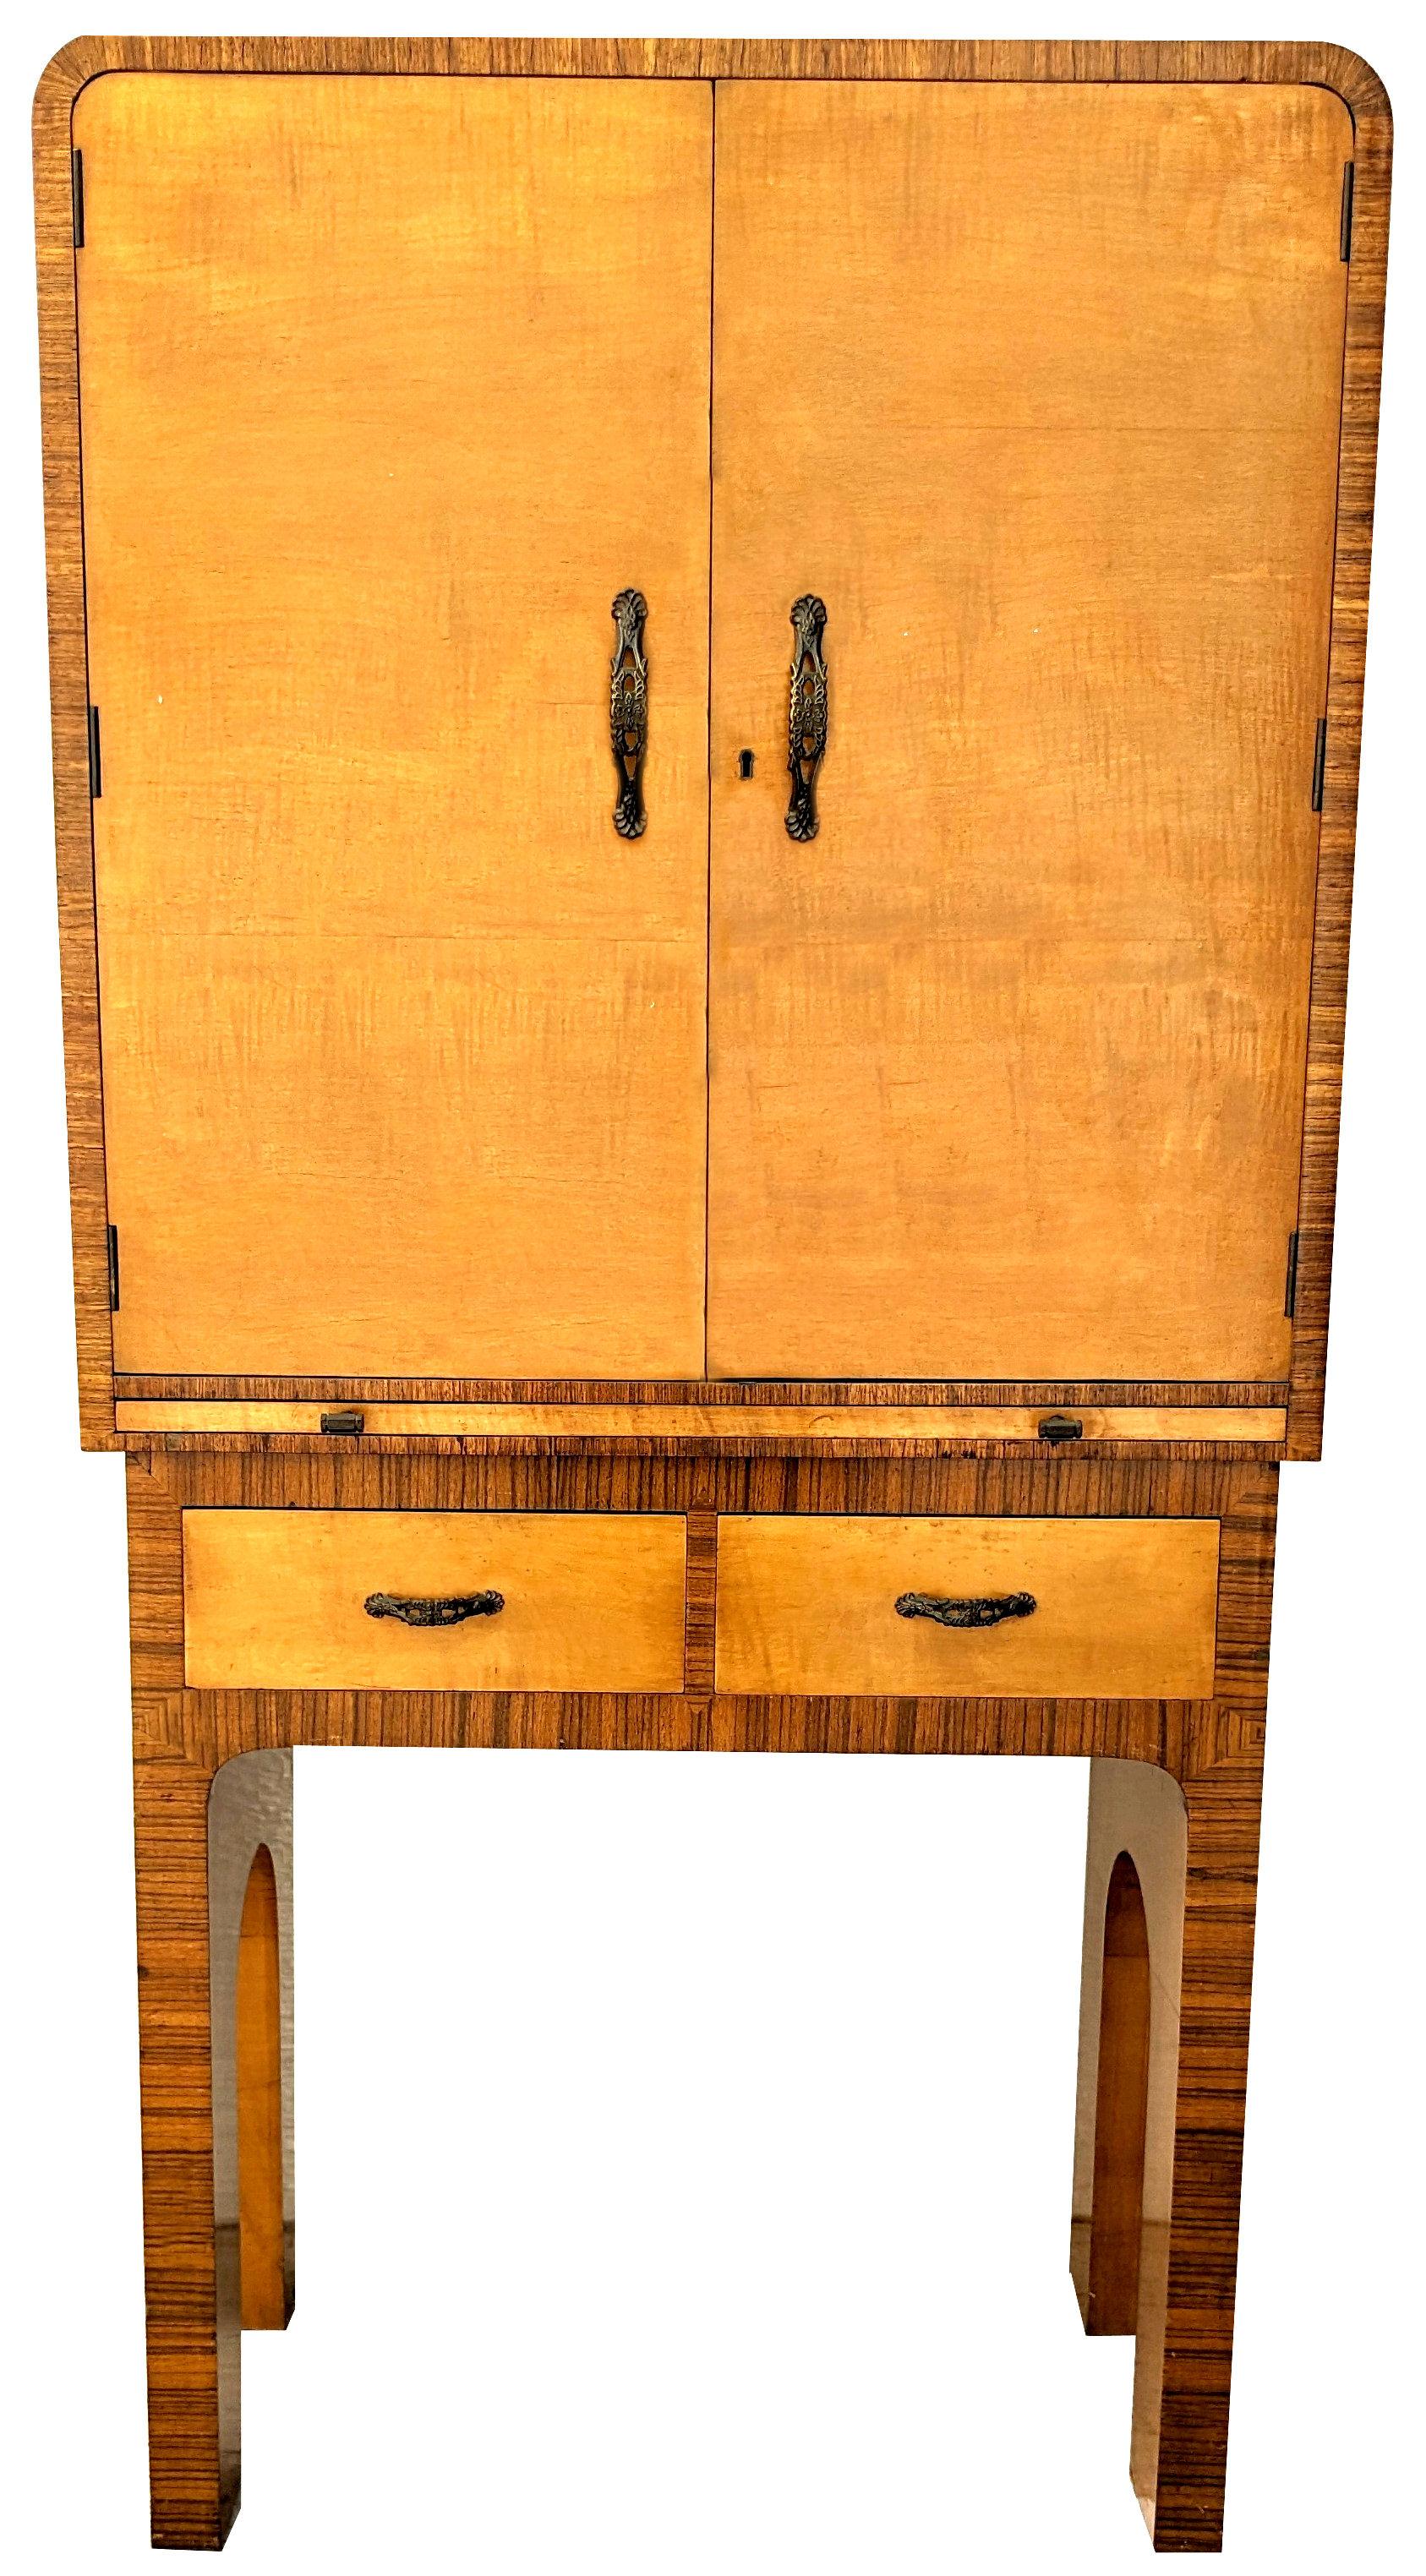 English Art Deco Satinwood High End Cocktail Cabinet By Epstein Brothers, c1930 For Sale